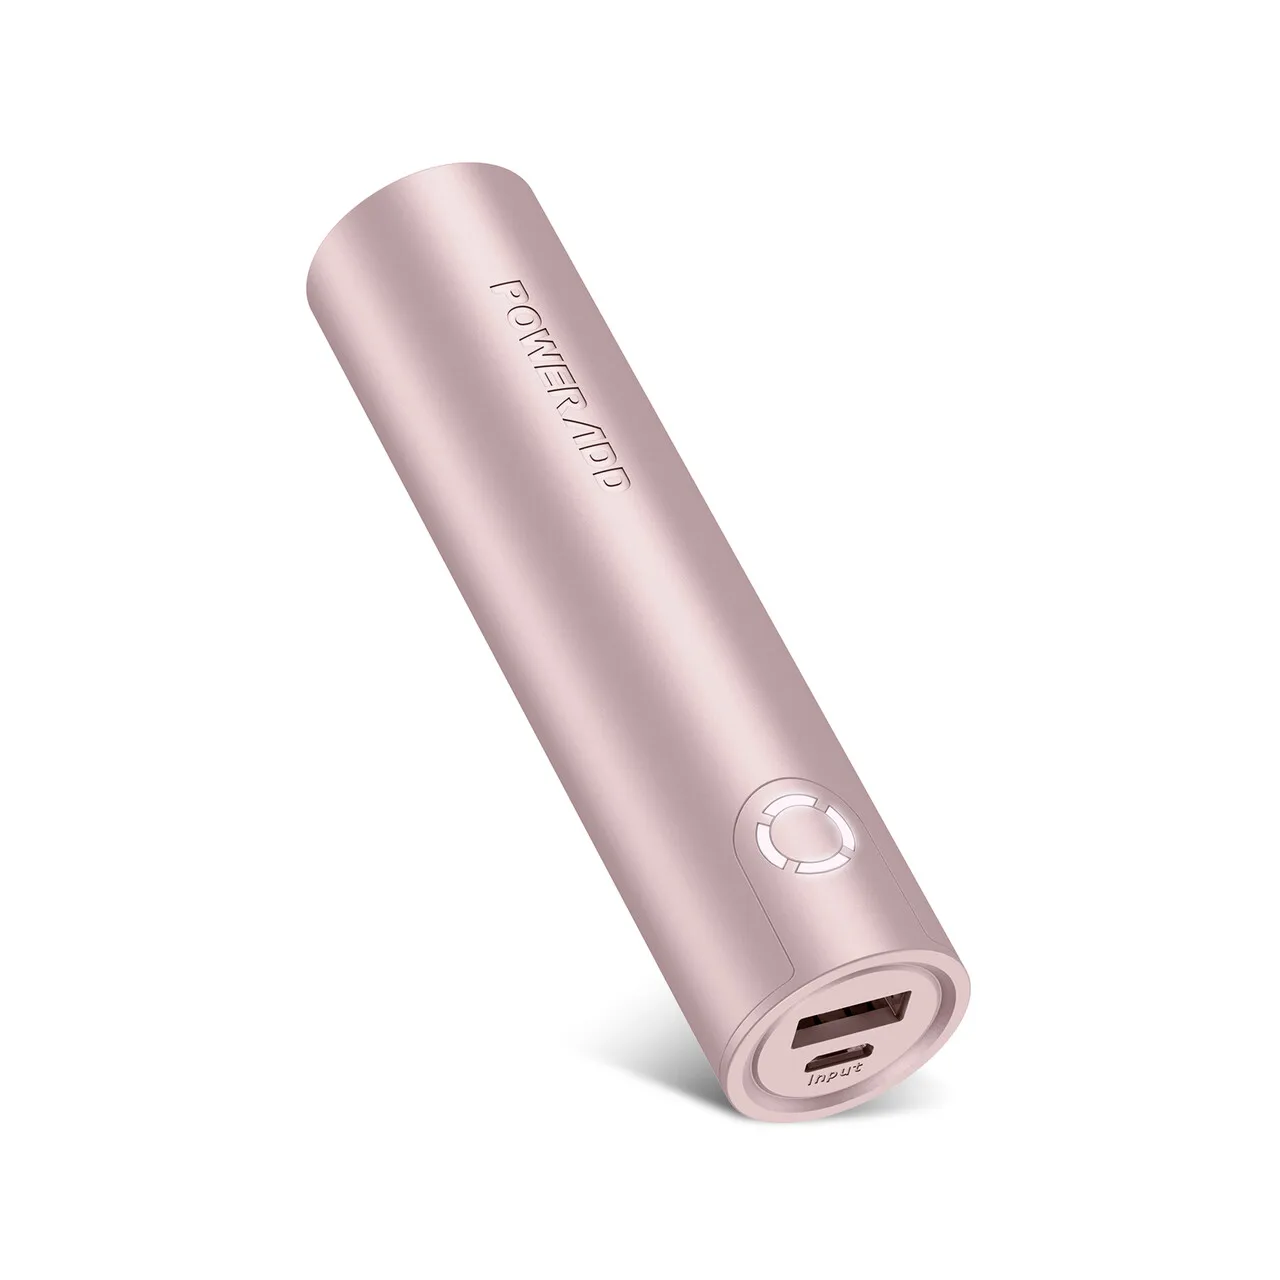 Mini Portable Power Bank New Arrival Pink Lightest Poweradd Power Bank With Micro Usb Cable